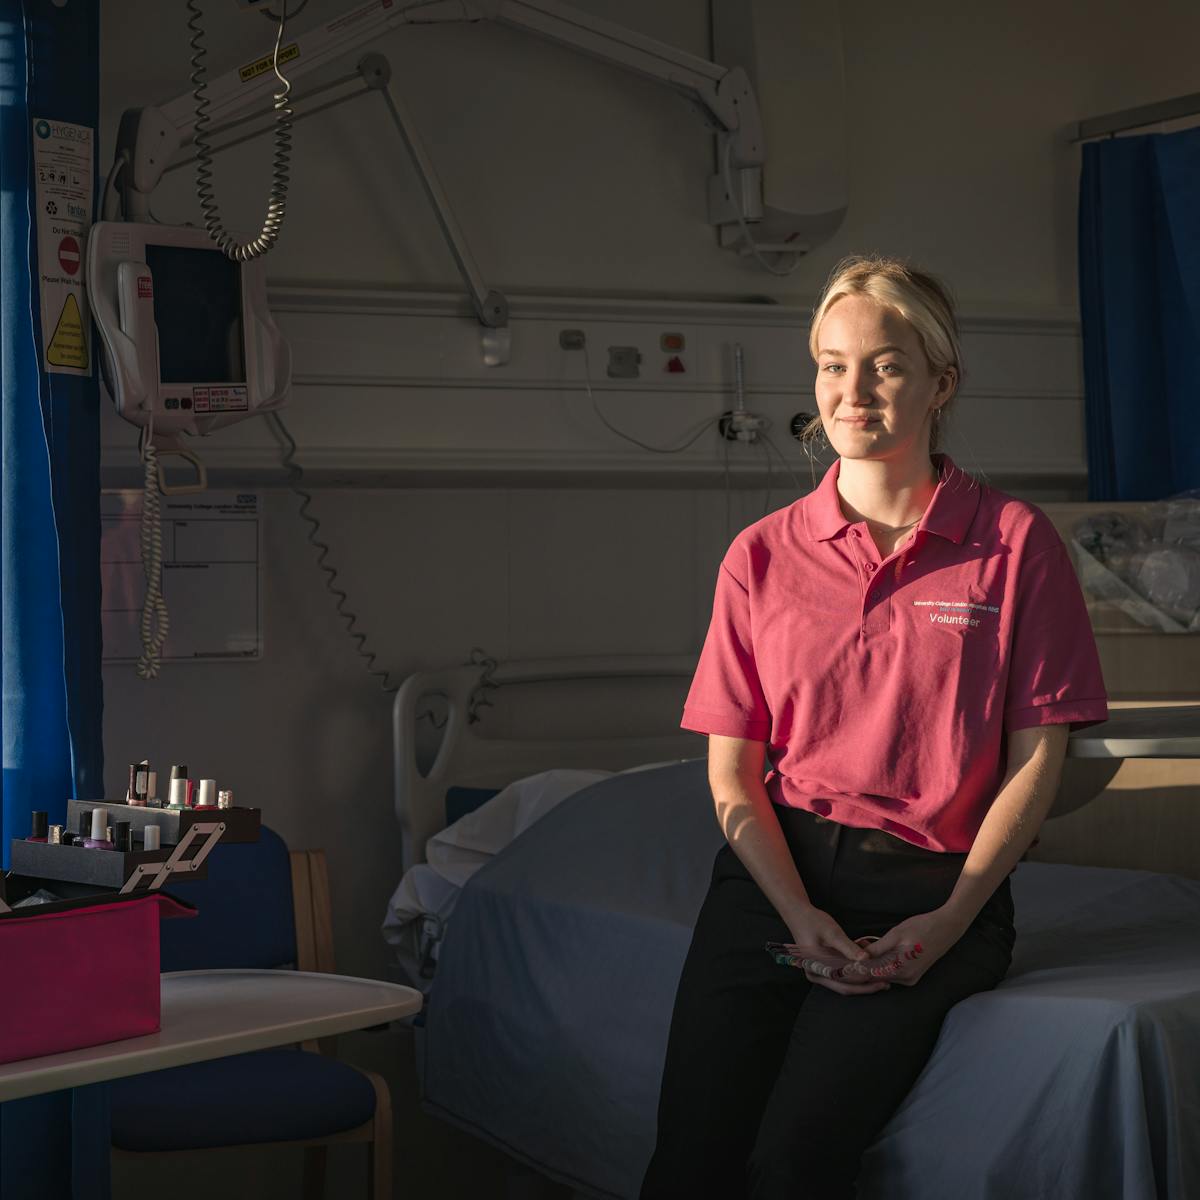 Photograph of a young woman sitting on the side of a bed in a hospital ward, light by the light of the setting sun streaming in through the window. She is wearing a pink polo shirt smiling to camera. Behind her are the blue bay curtains and monitoring devices of a typical hospital setting. On a table to the left is an open pink case containing nail varnish beauty products.